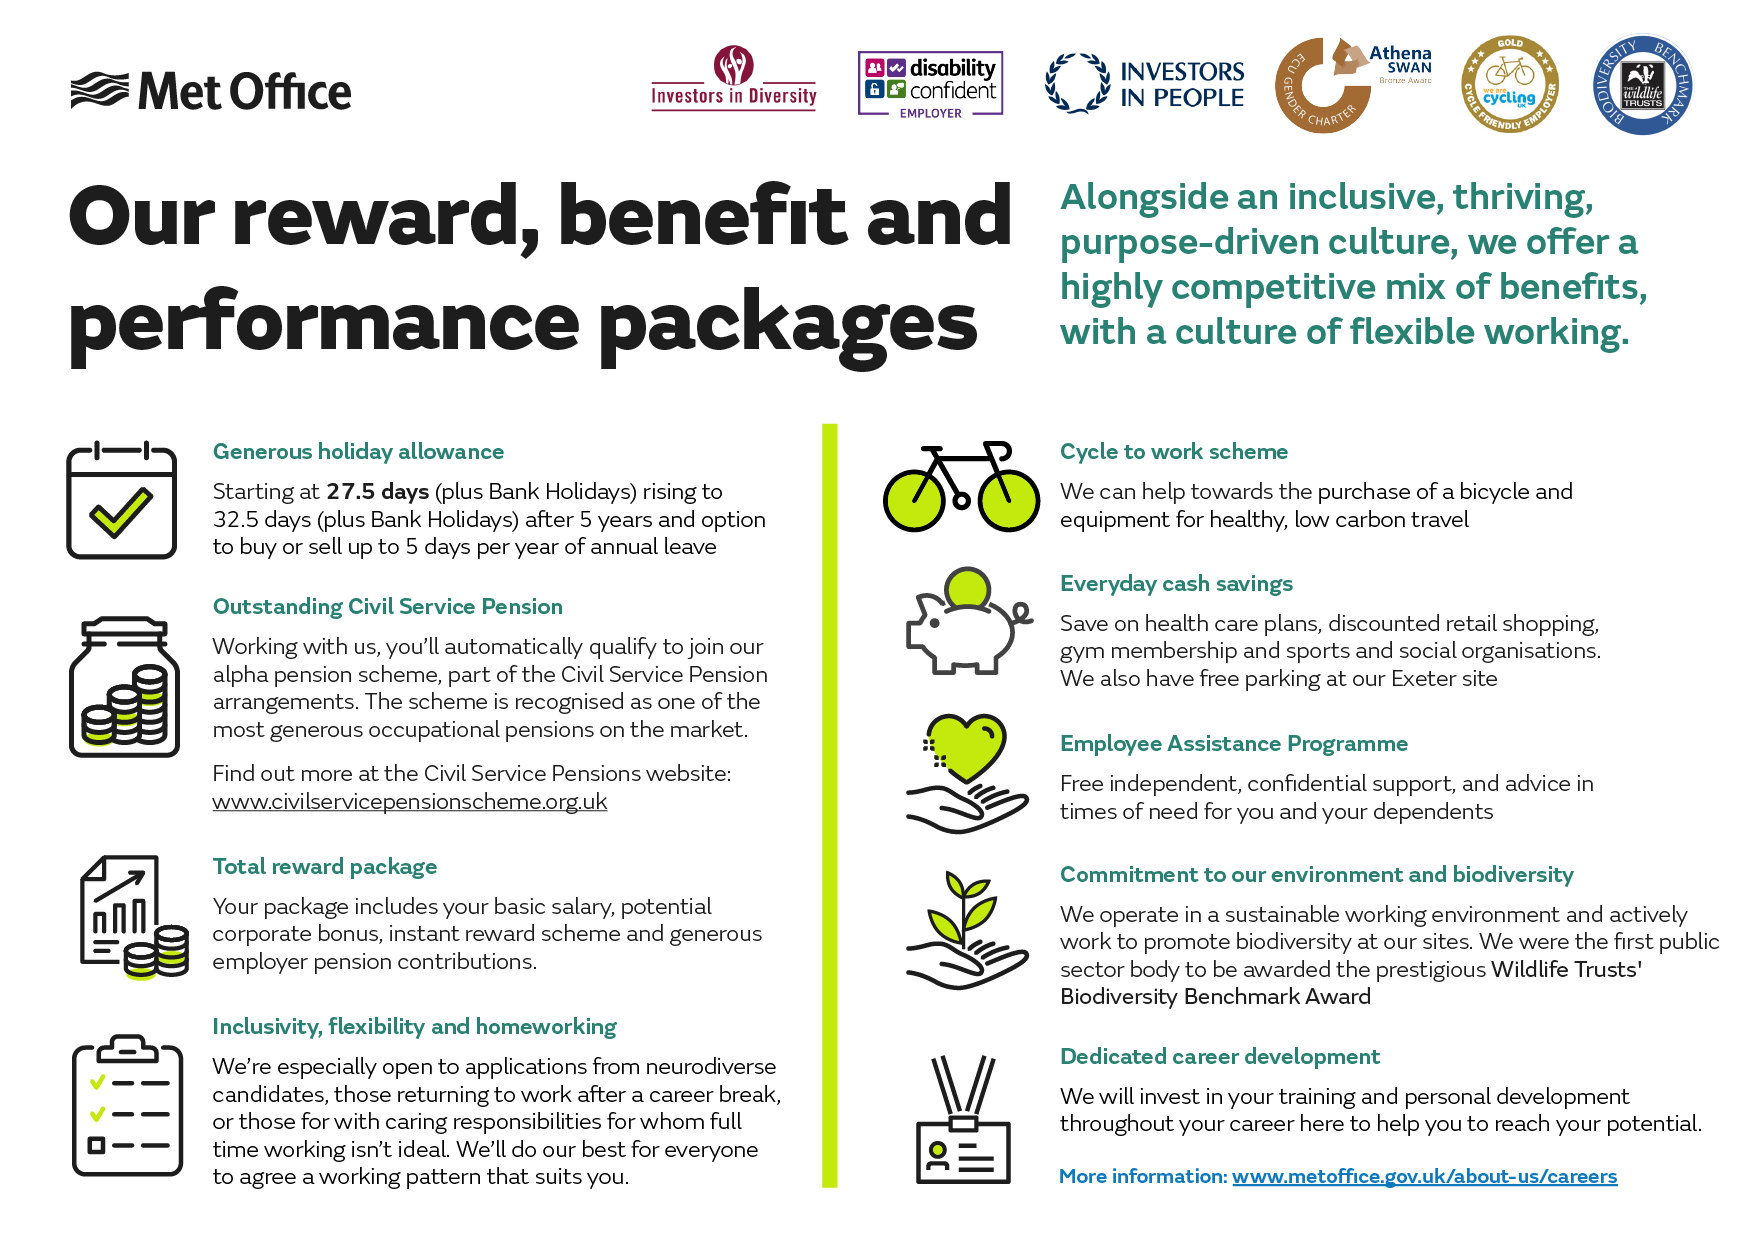 This is a graphic detailing rewards and benefits at the Met Office